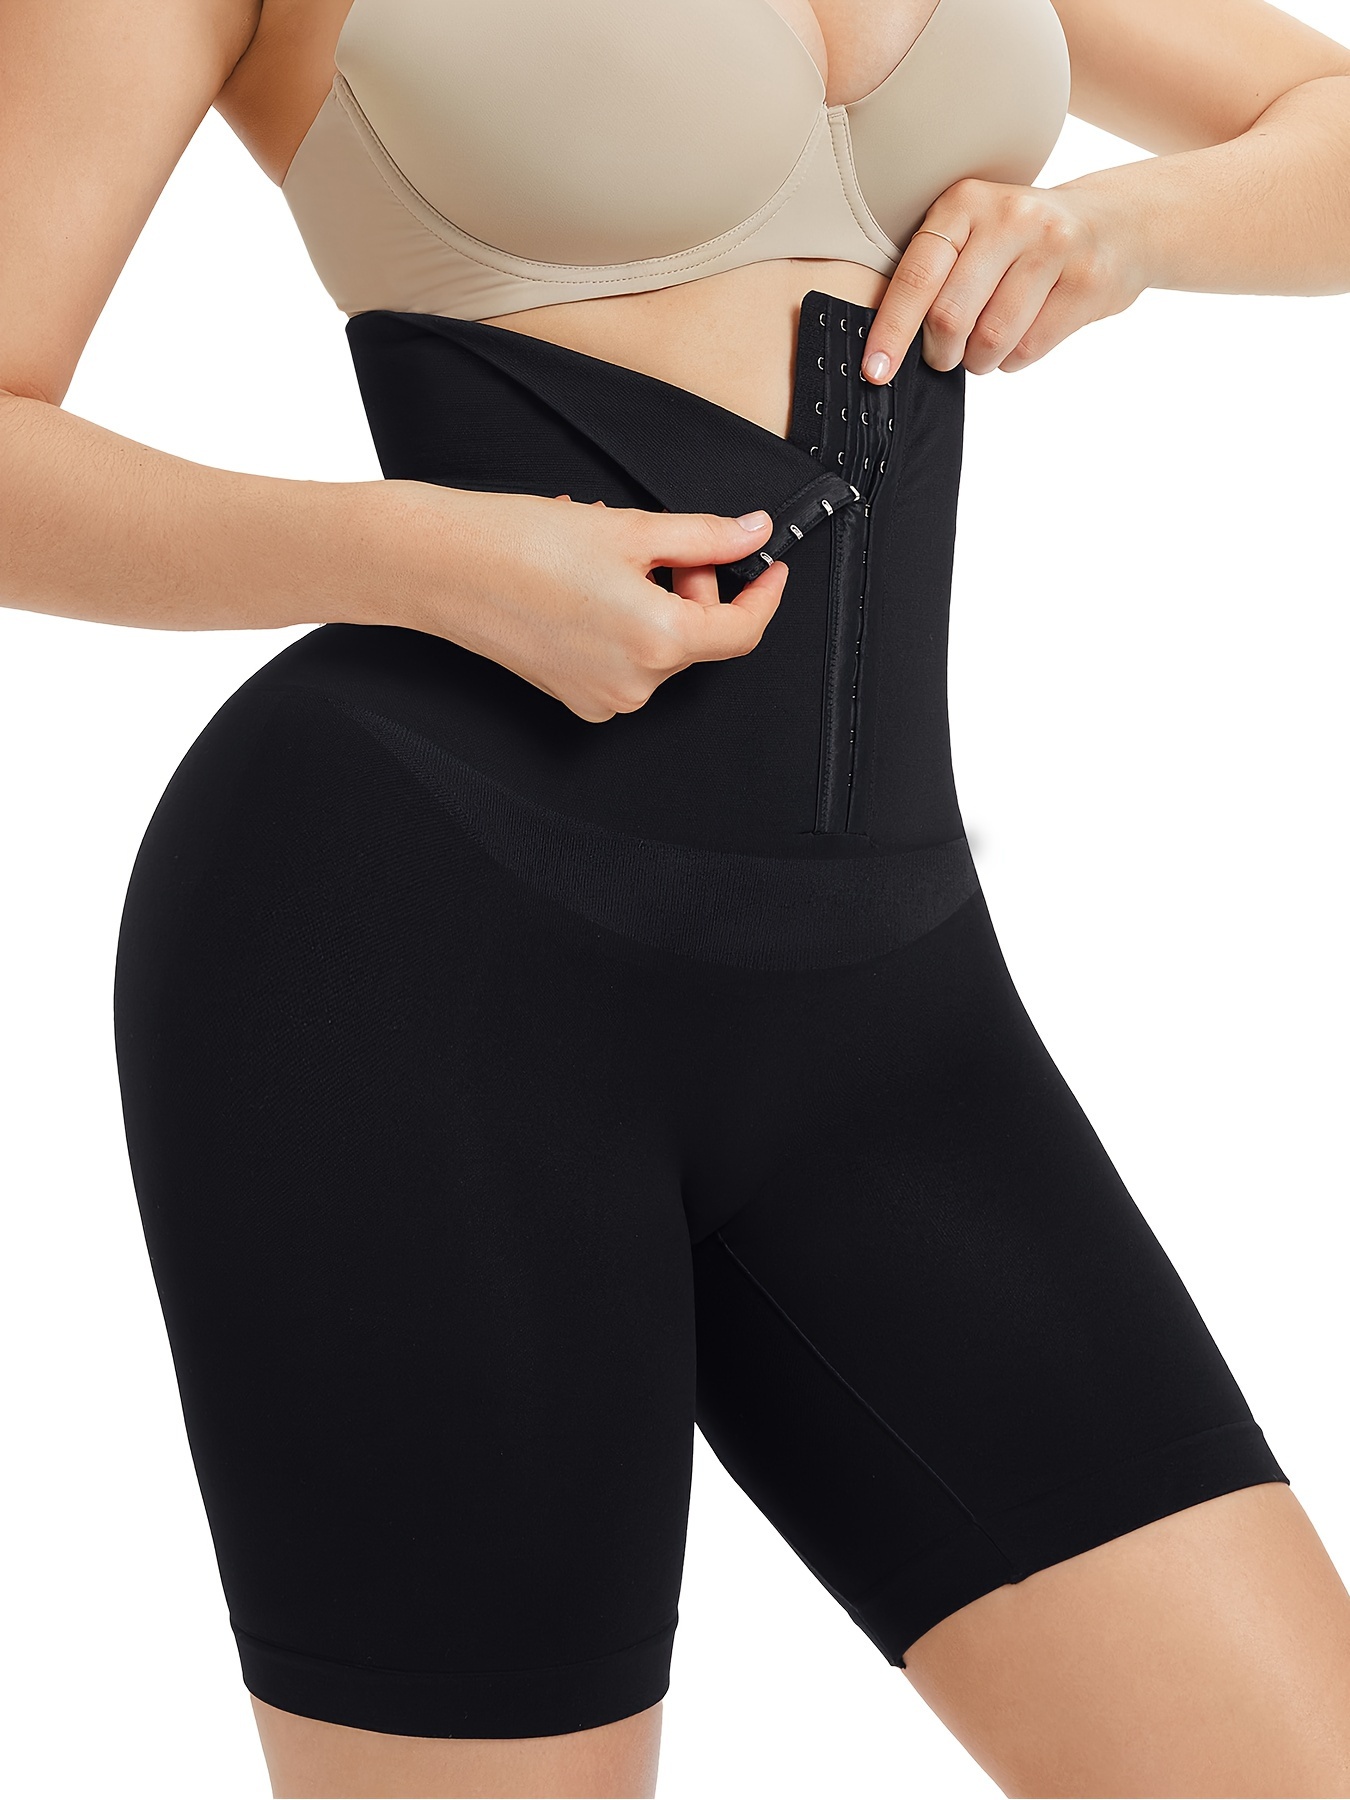 High Waisted Body Shapewear Shorts For Women, Tummy Control Breathable  Tight Slimming Shorts